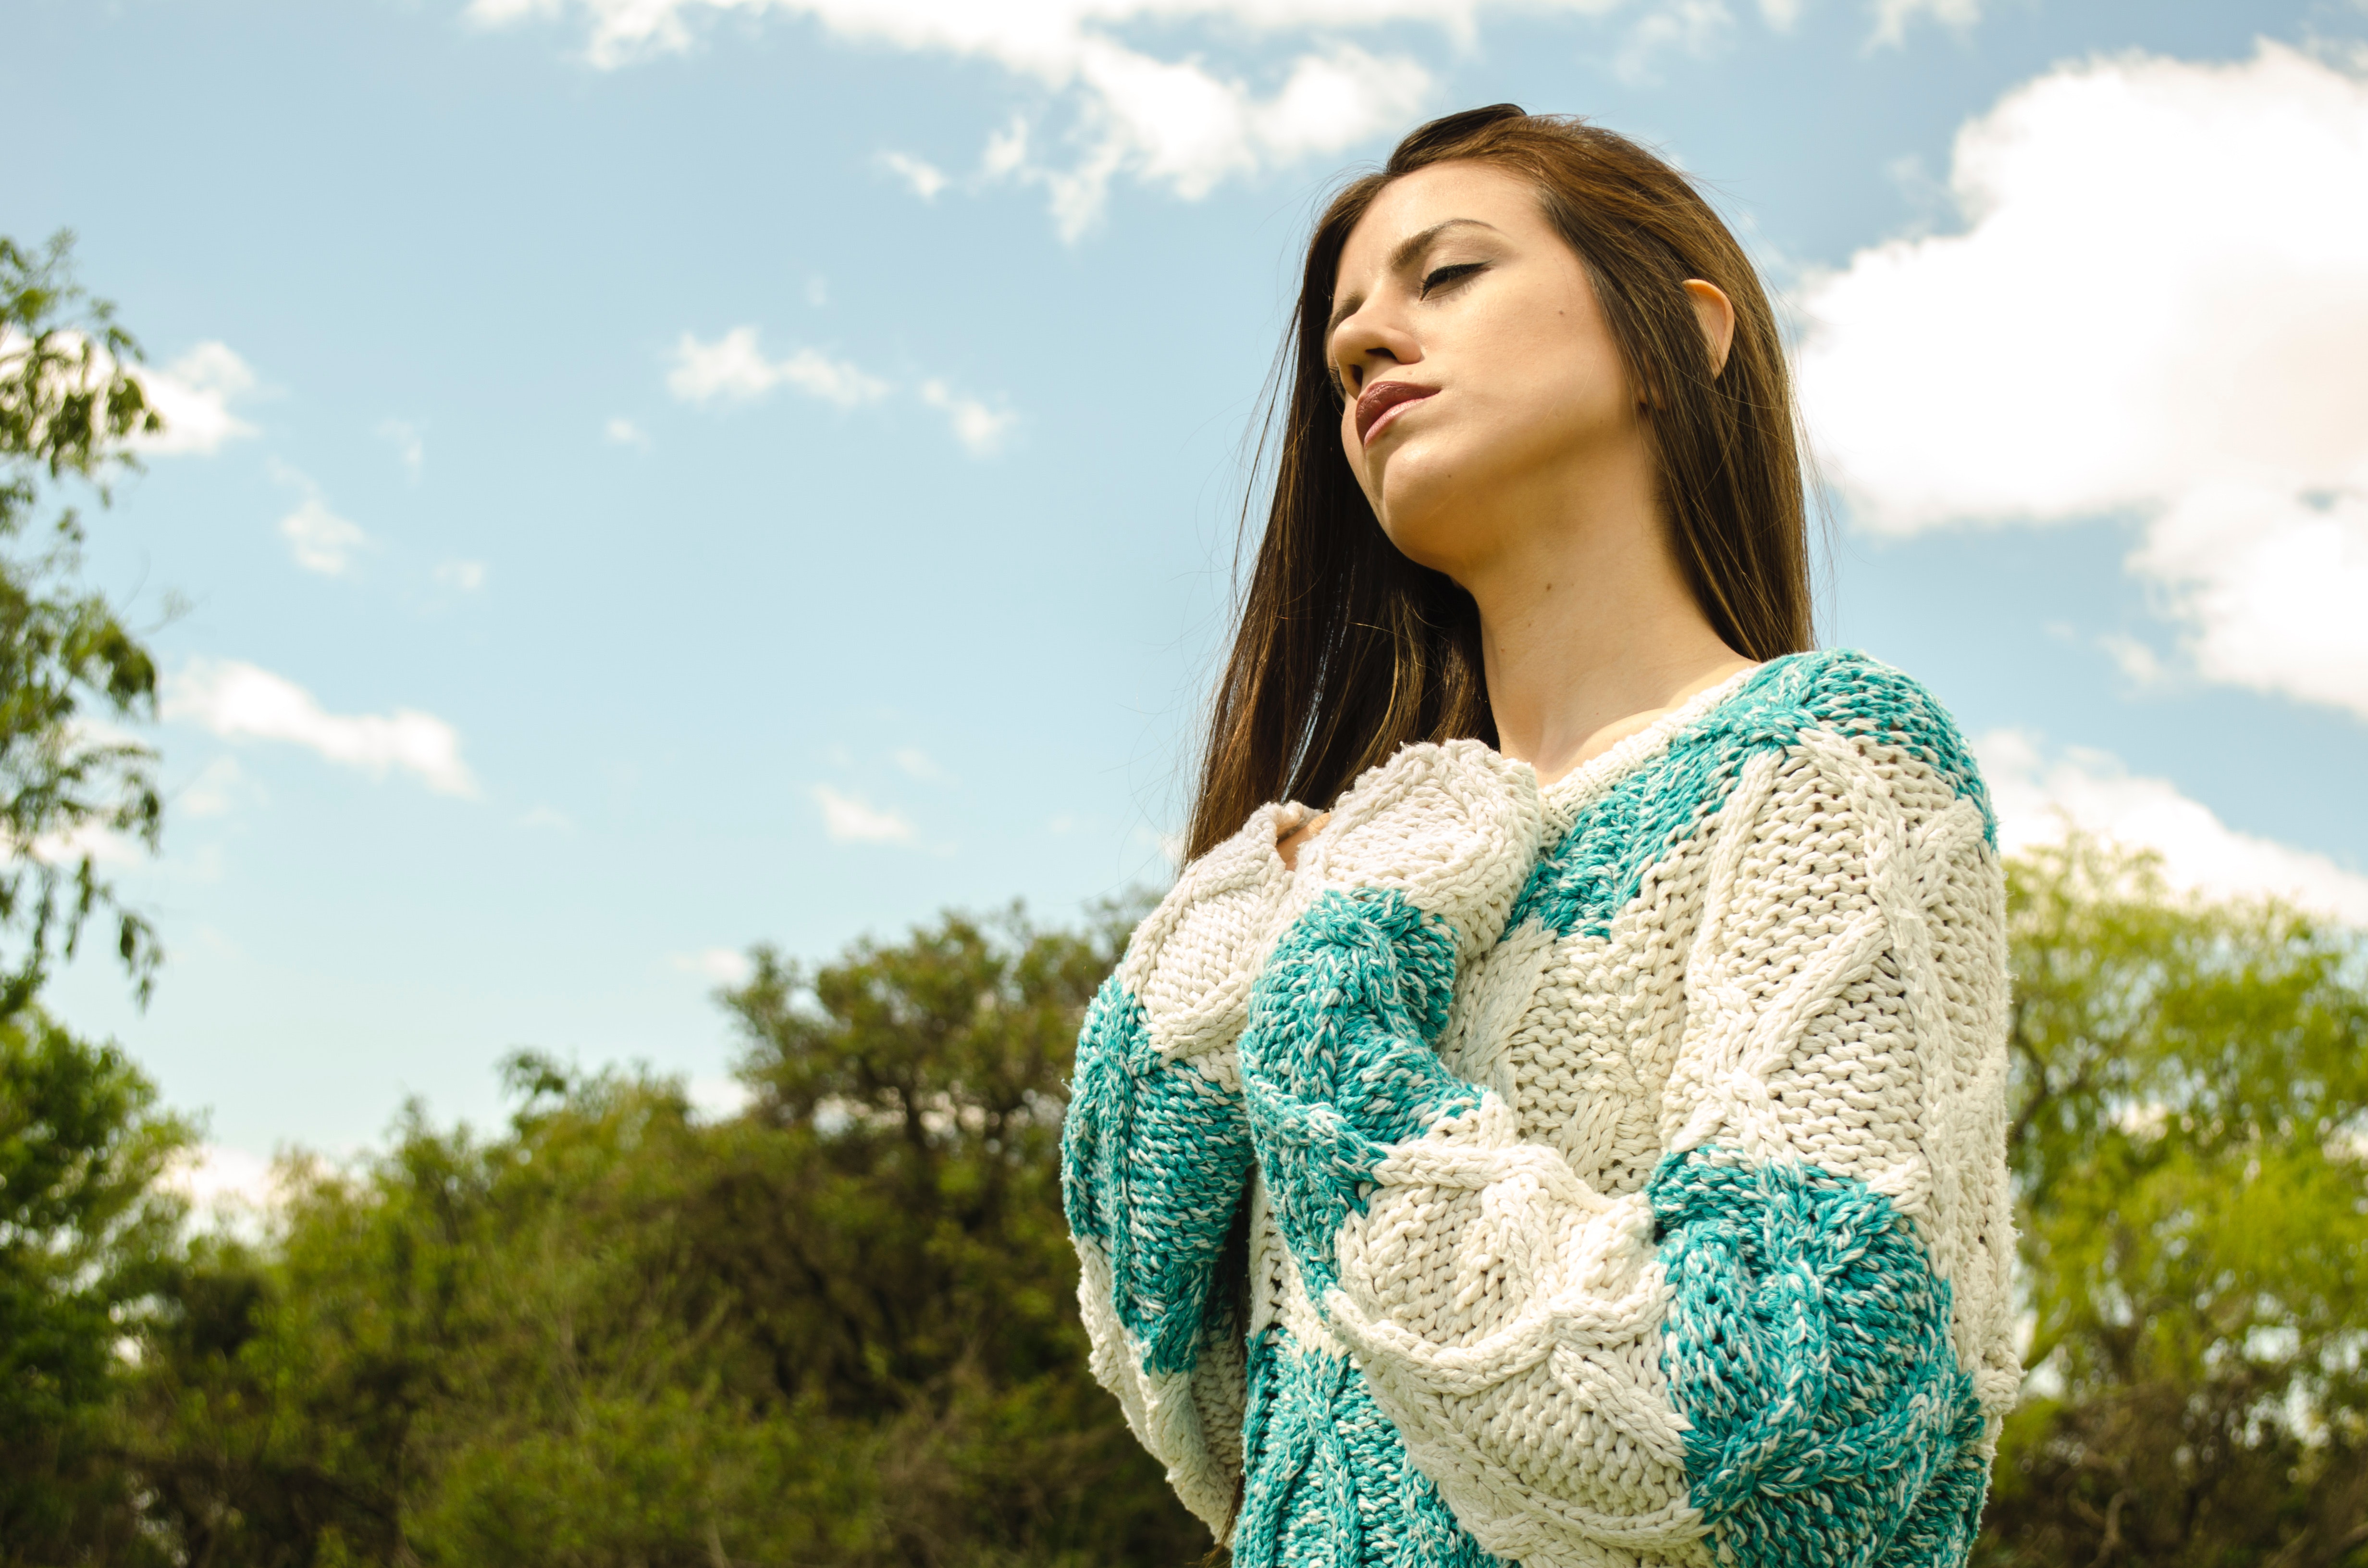 Woman in white and teal crochet dress under cloudy sky photo